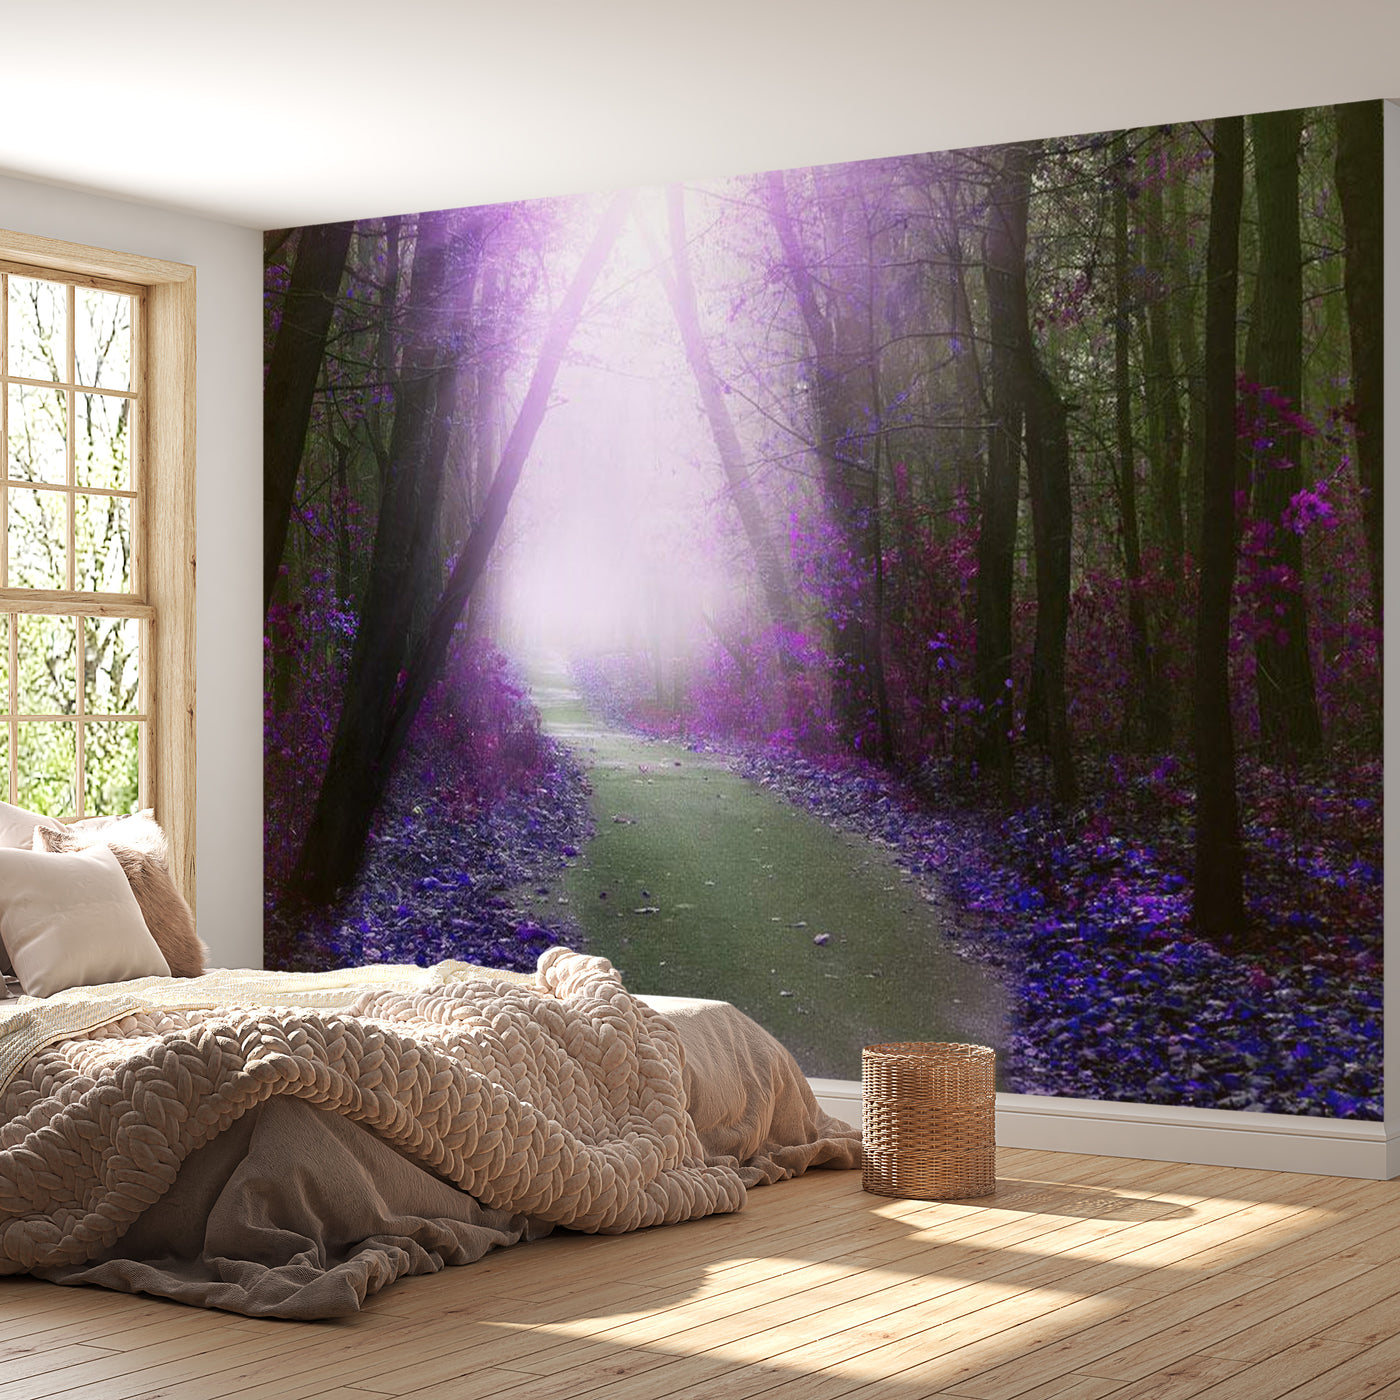 Peel & Stick Forest Wall Mural - Purple Path - Removable Wall Decals